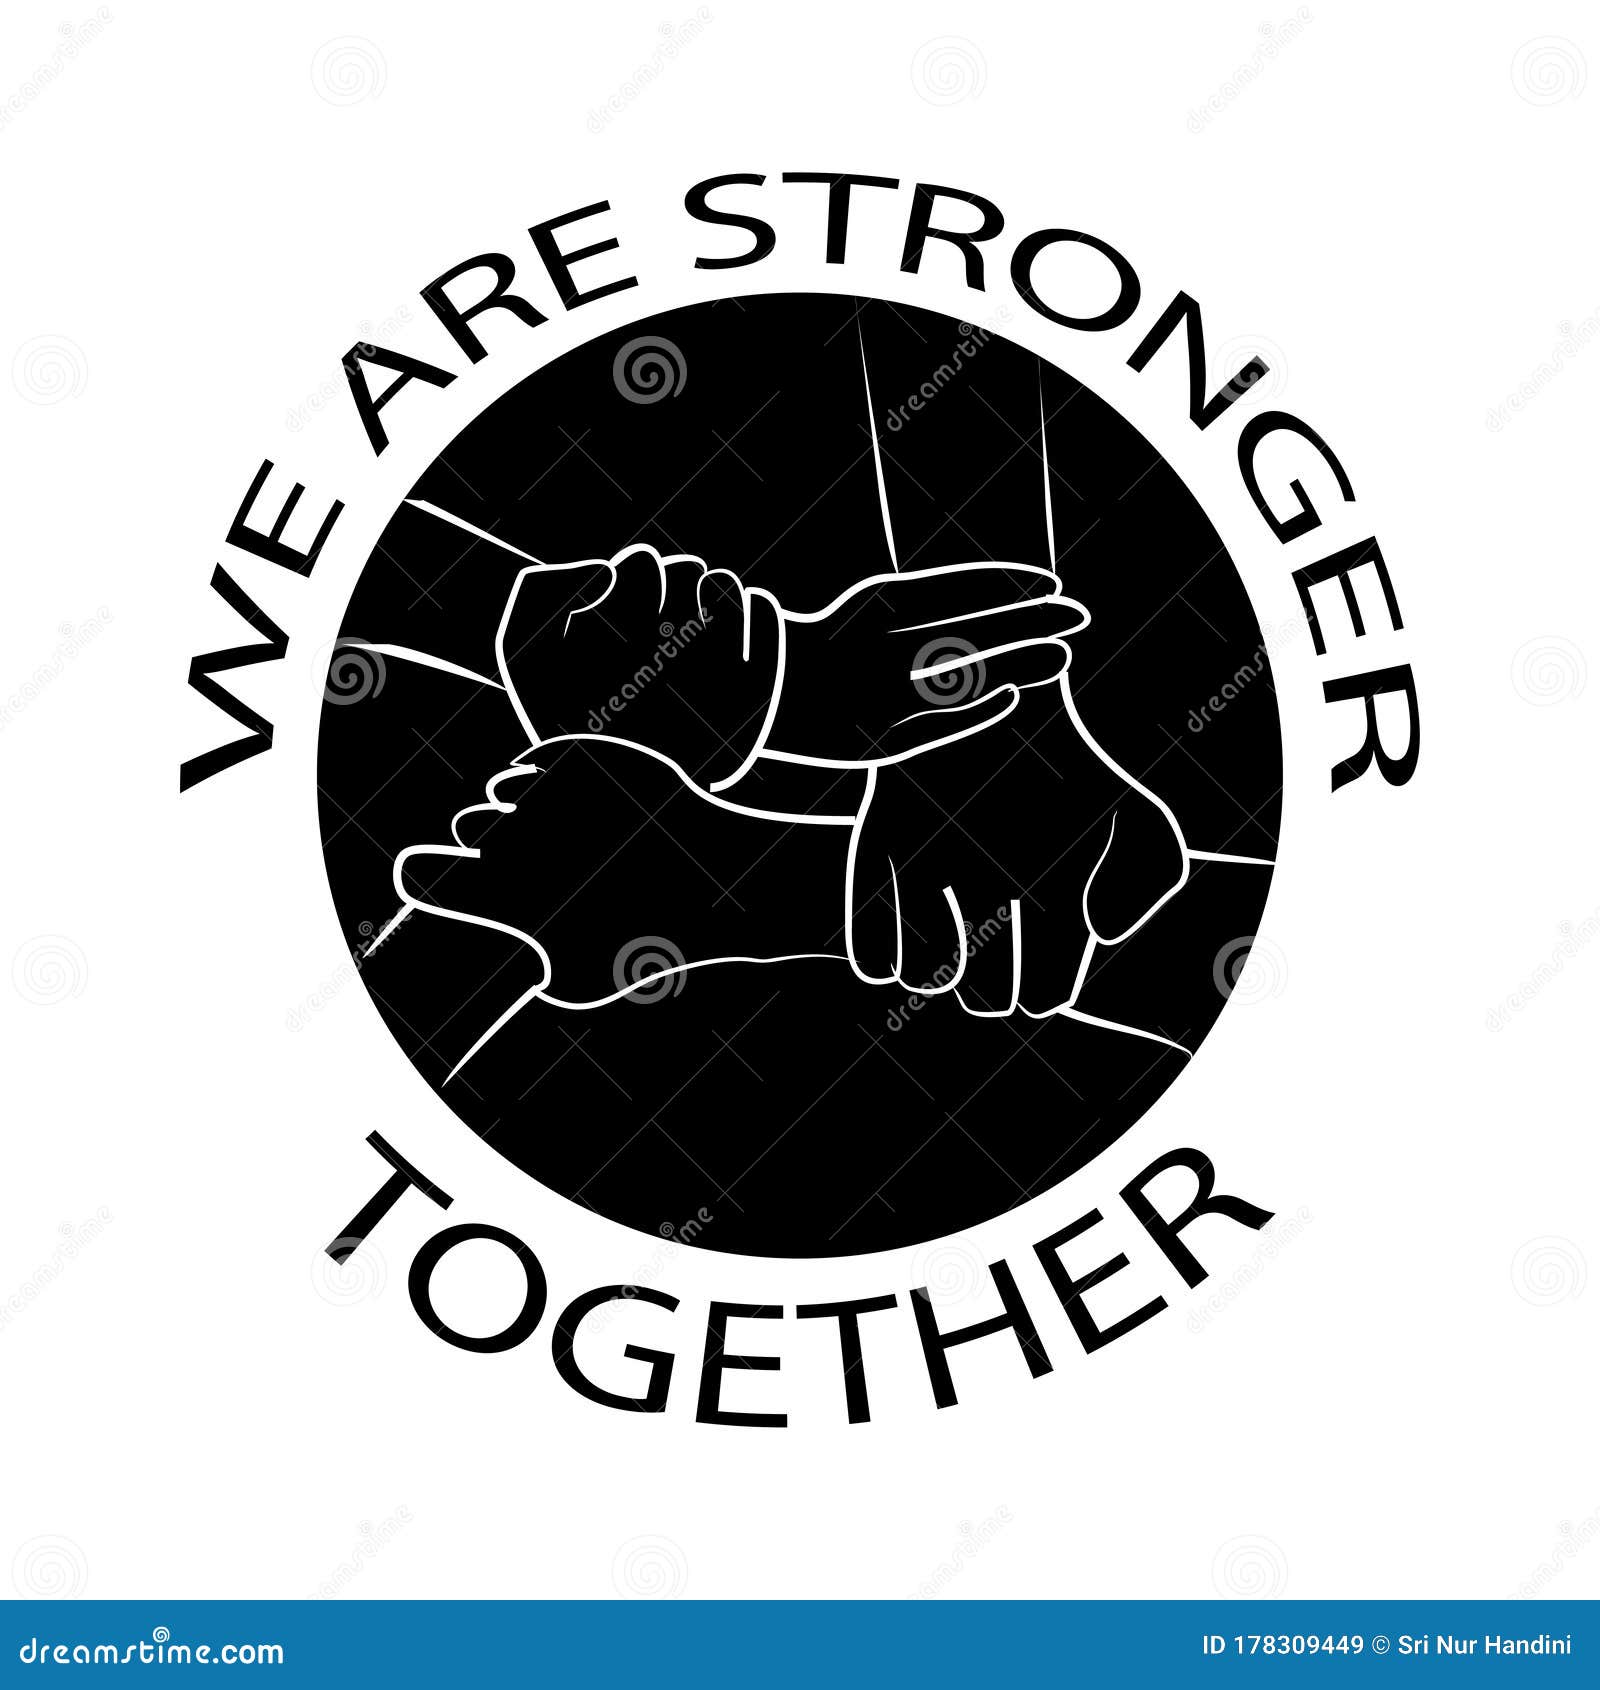 we are strong together